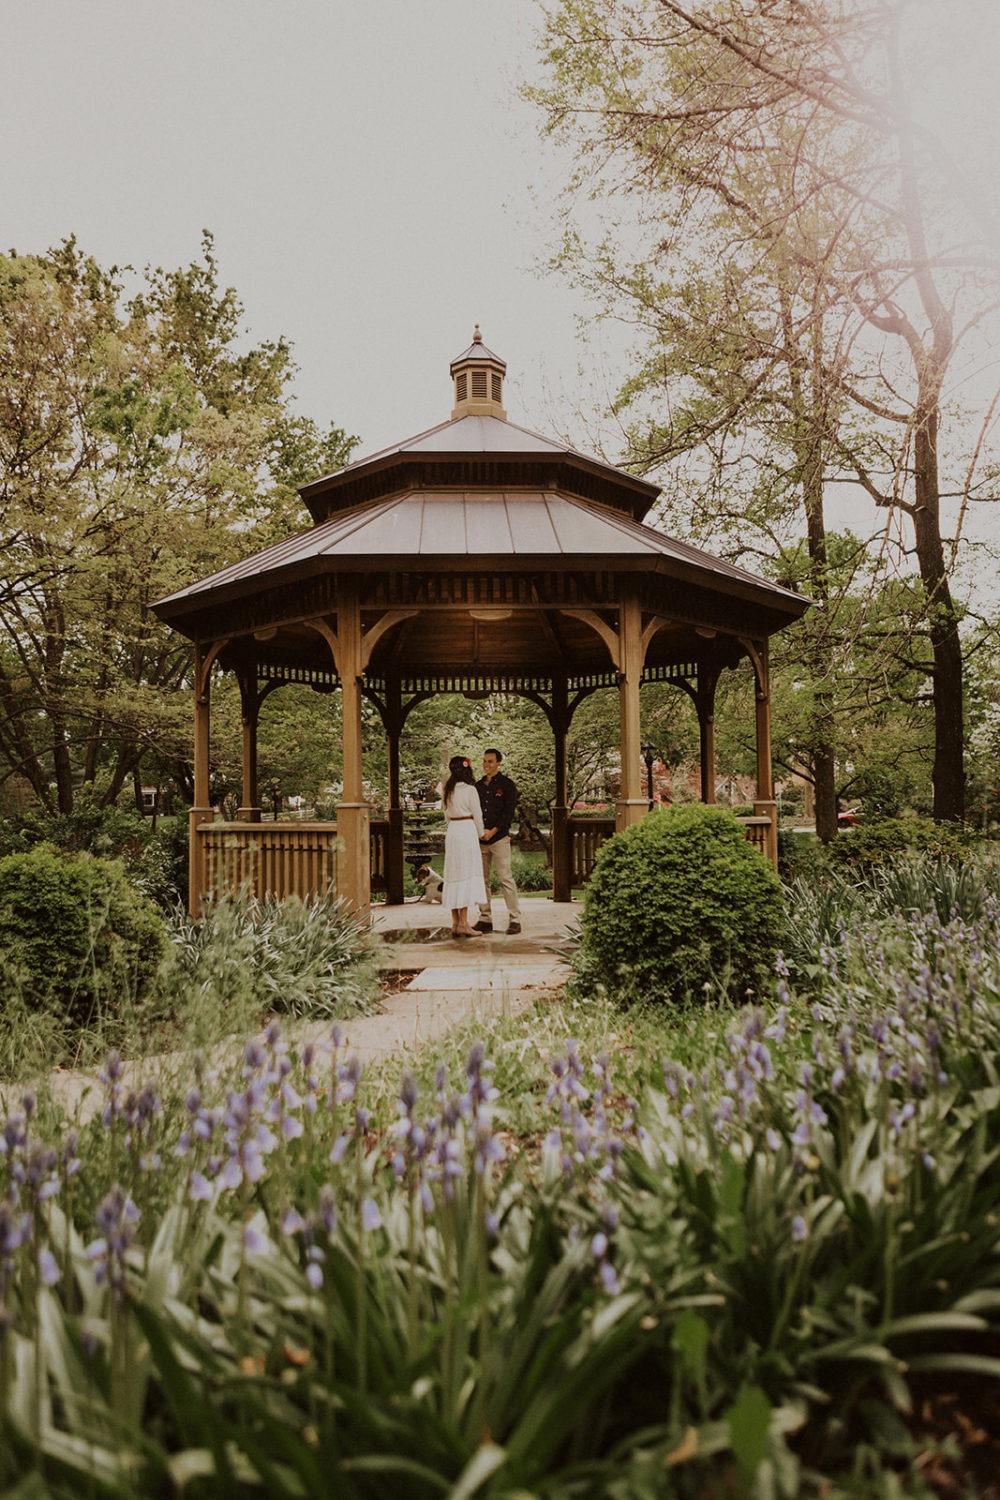 Couple holds hands standing in gazebo surrounded by spring flowers